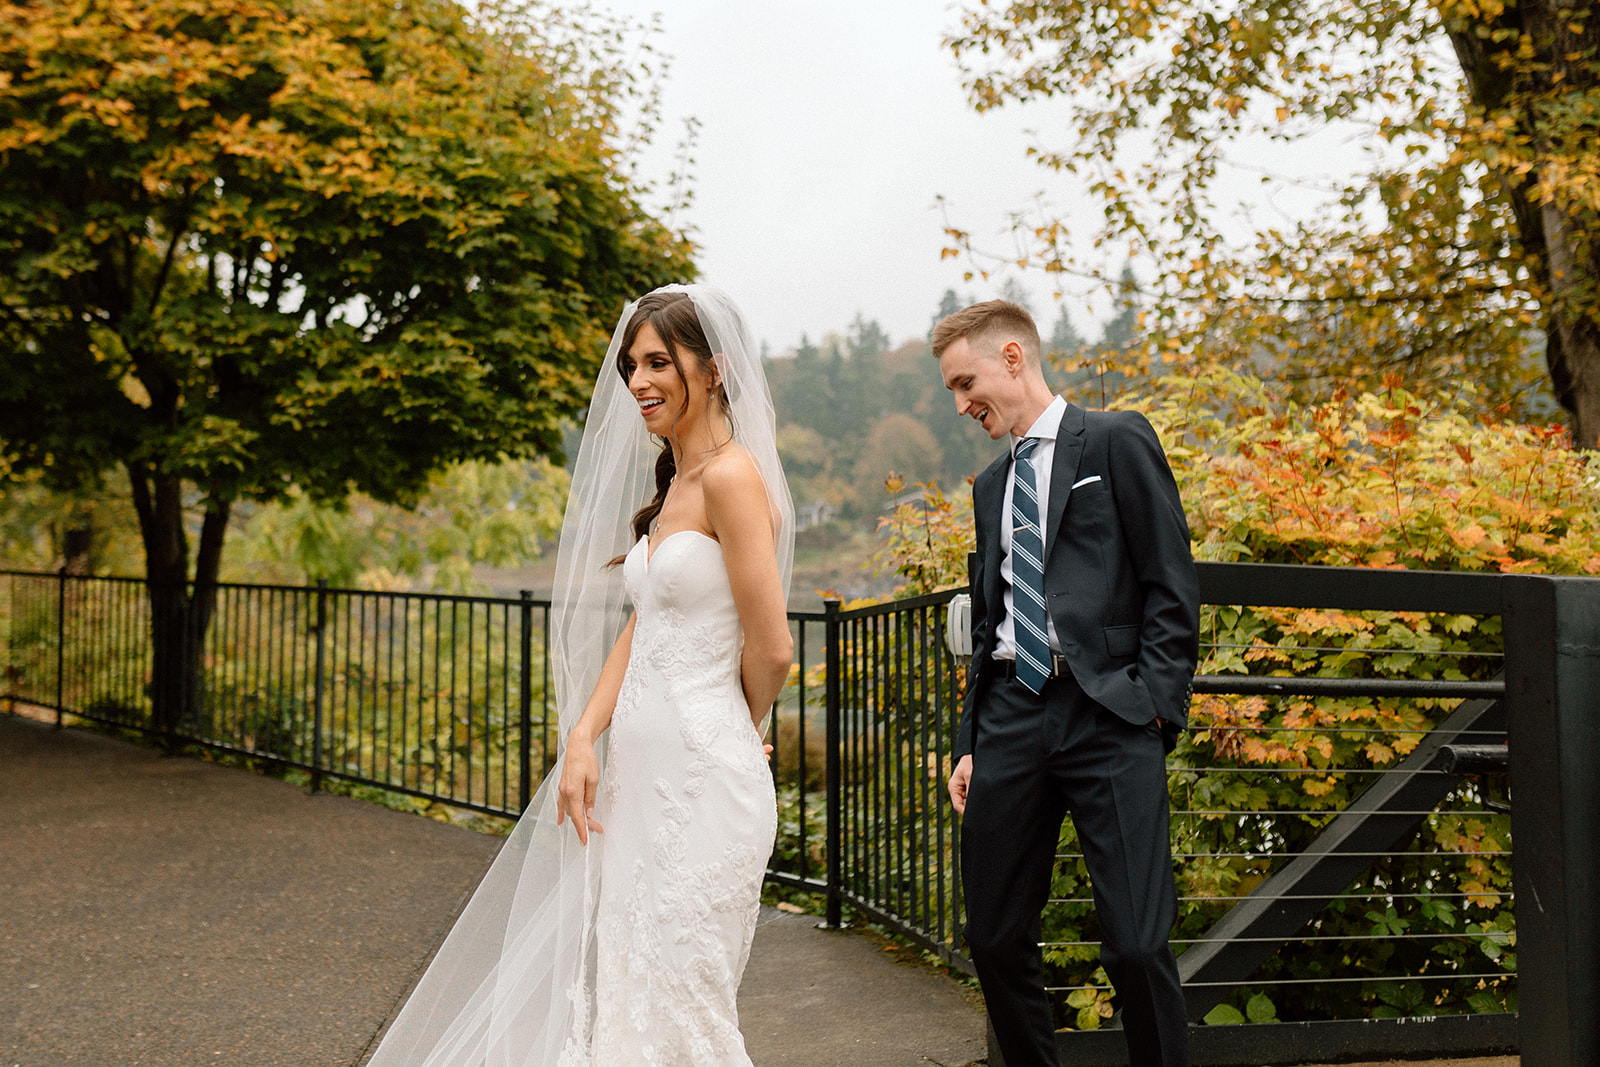 Bride and groom first look pictures captured by PWN Wedding Photographer